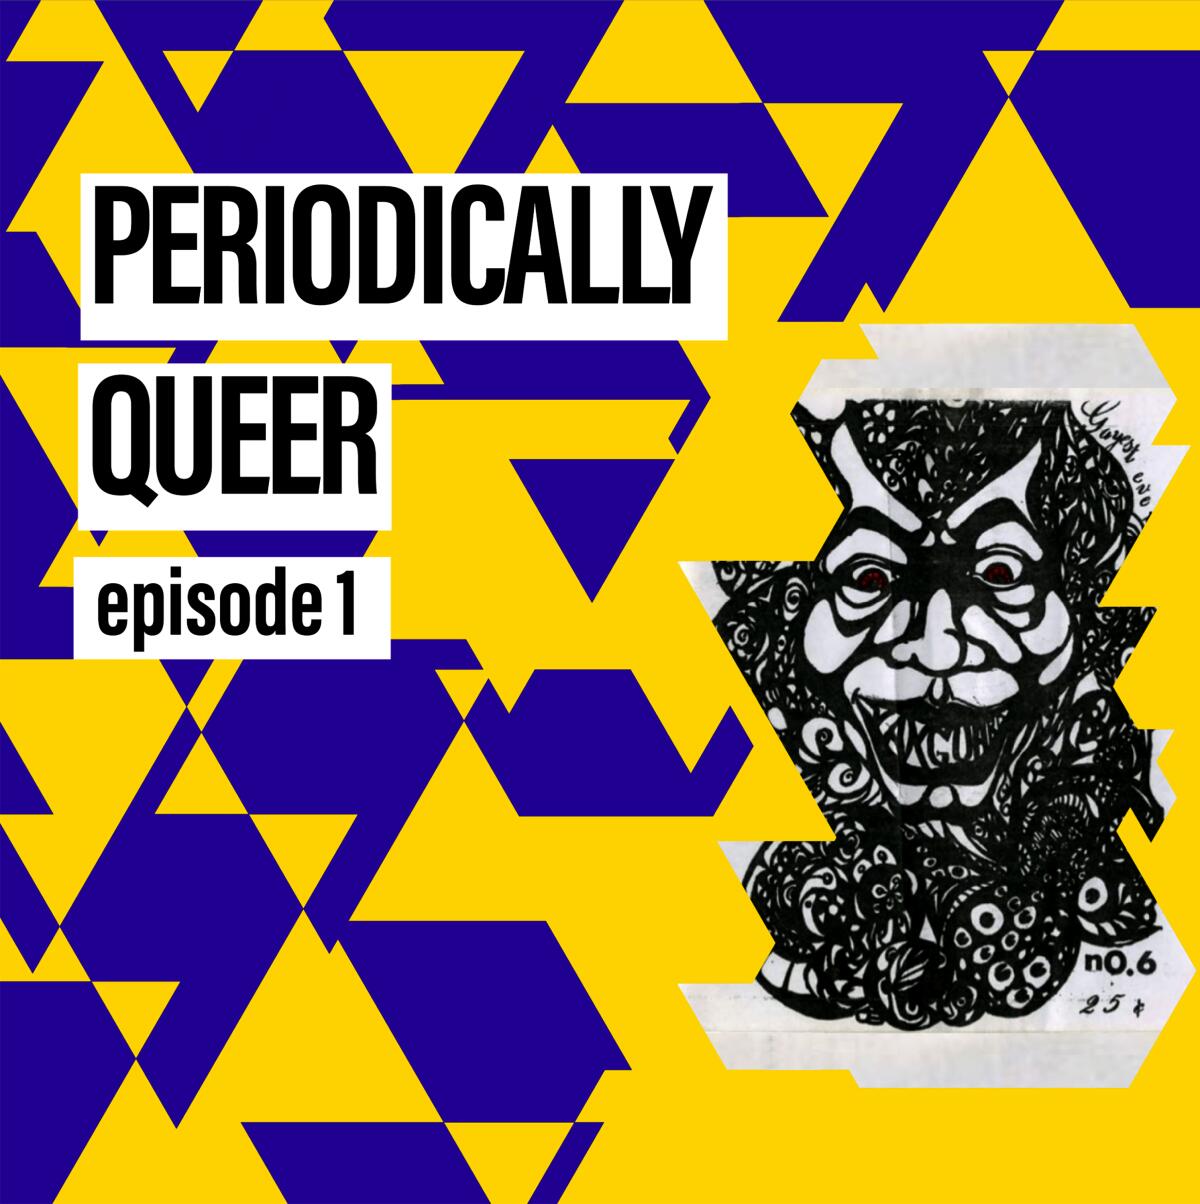 "Periodically Queer" podcast cover art.